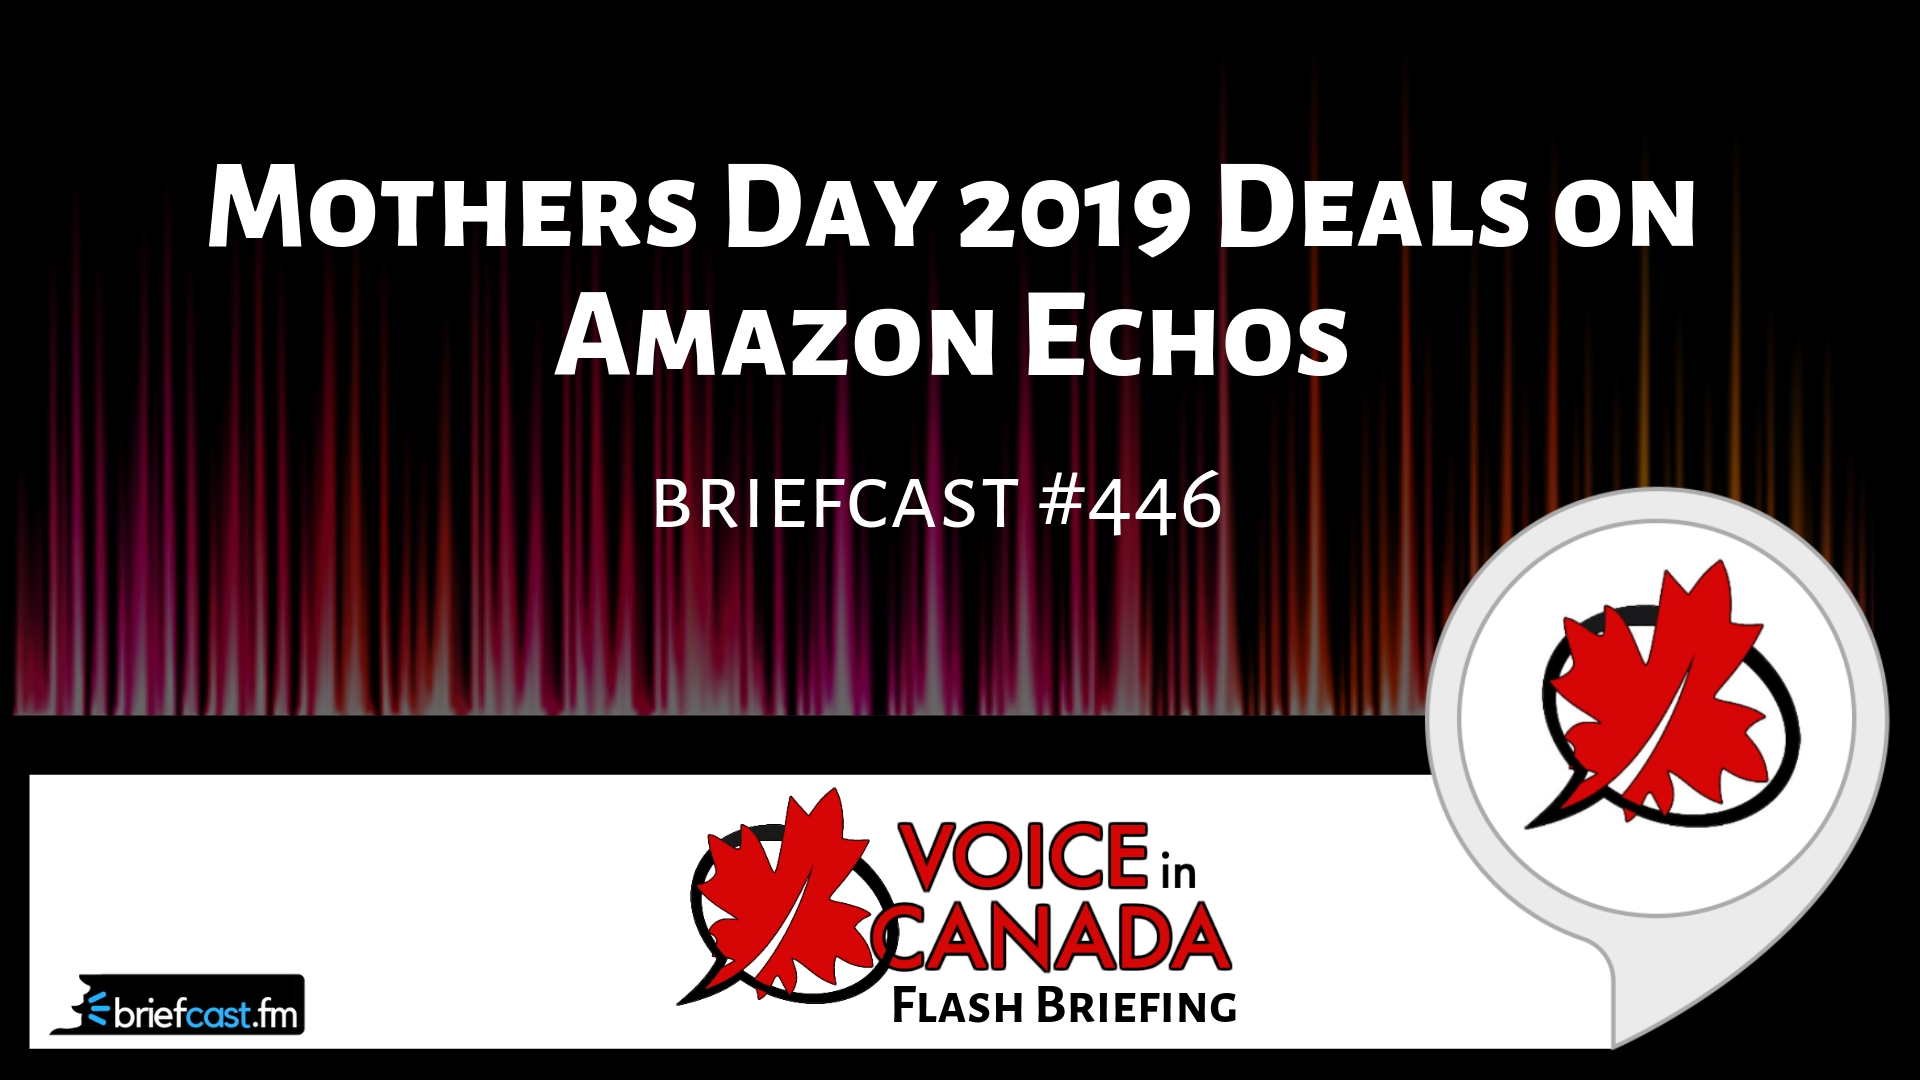 Mothers Day 2019 Deals on Amazon Echos